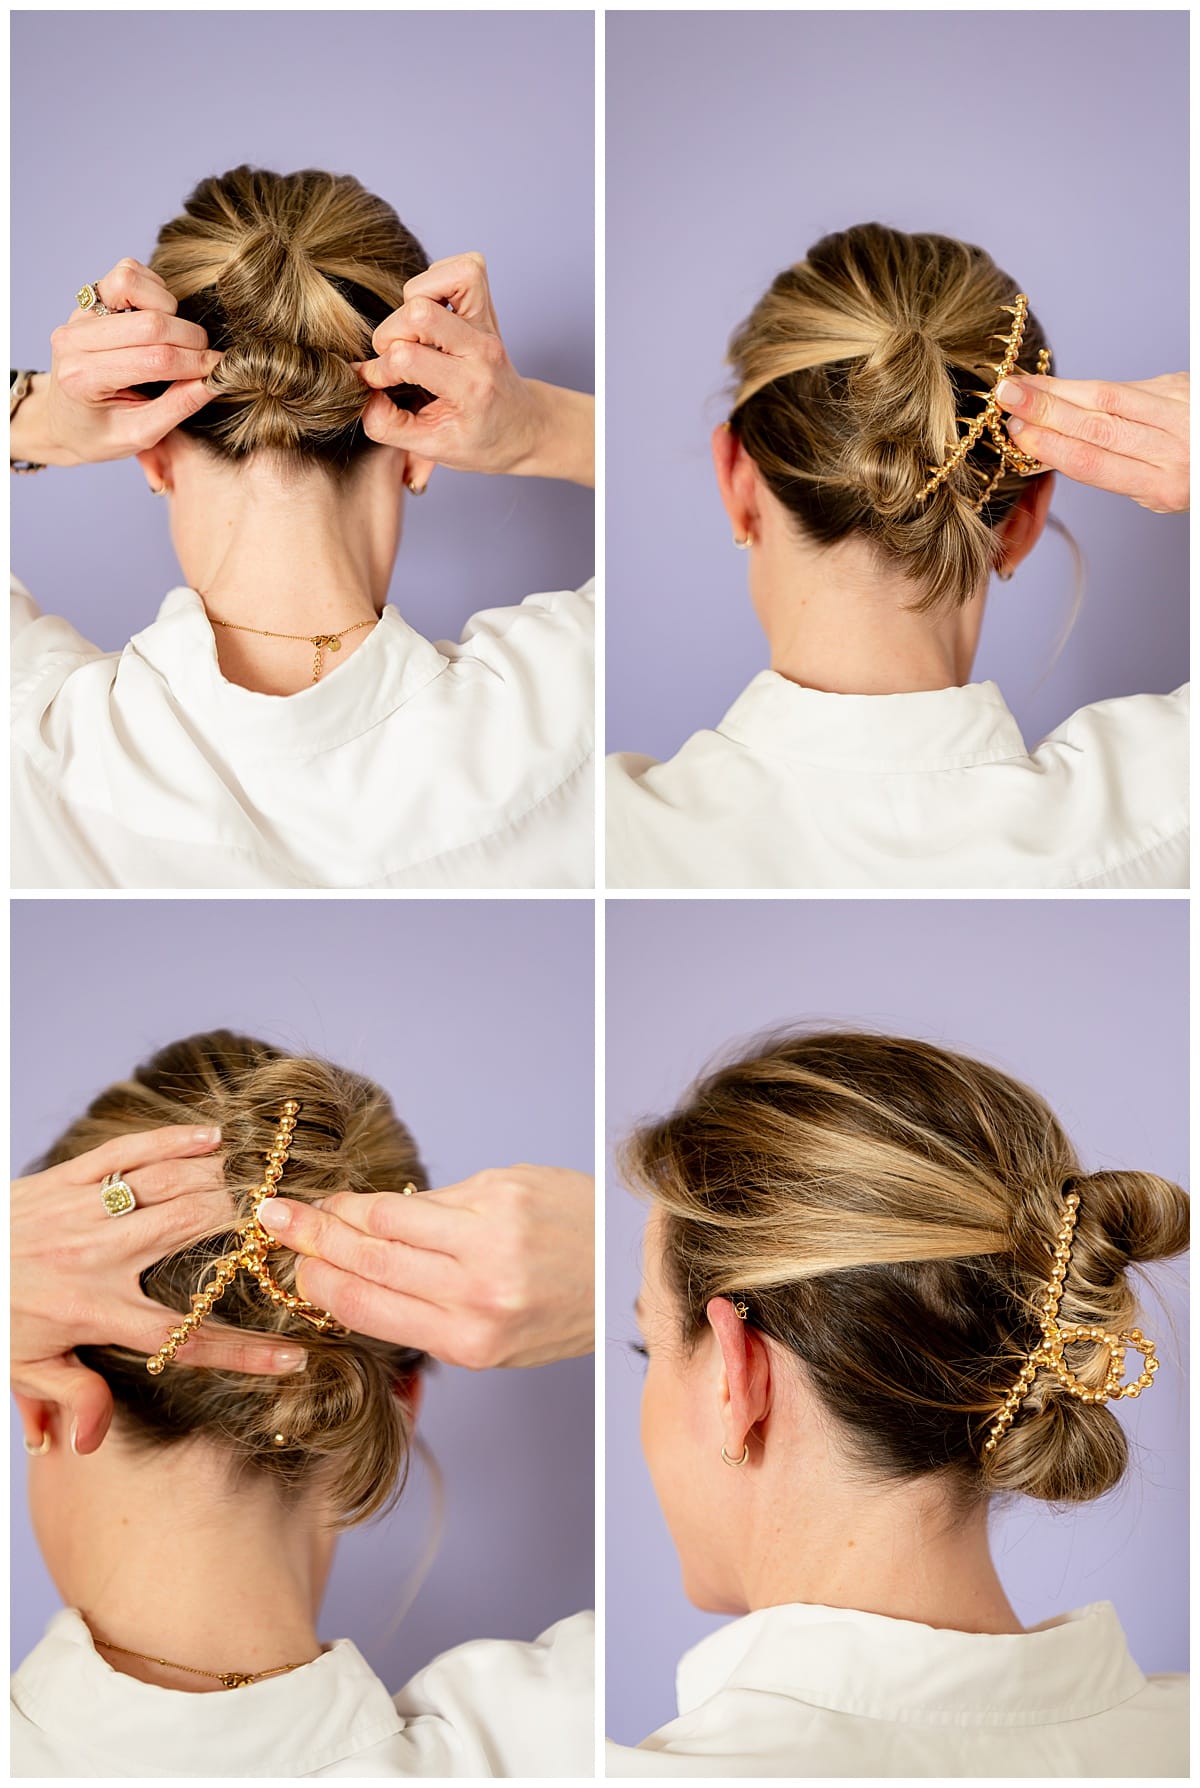 Step-by-step pictures of how to make short hair look fuller in a claw clip. Claw clip hair hack.